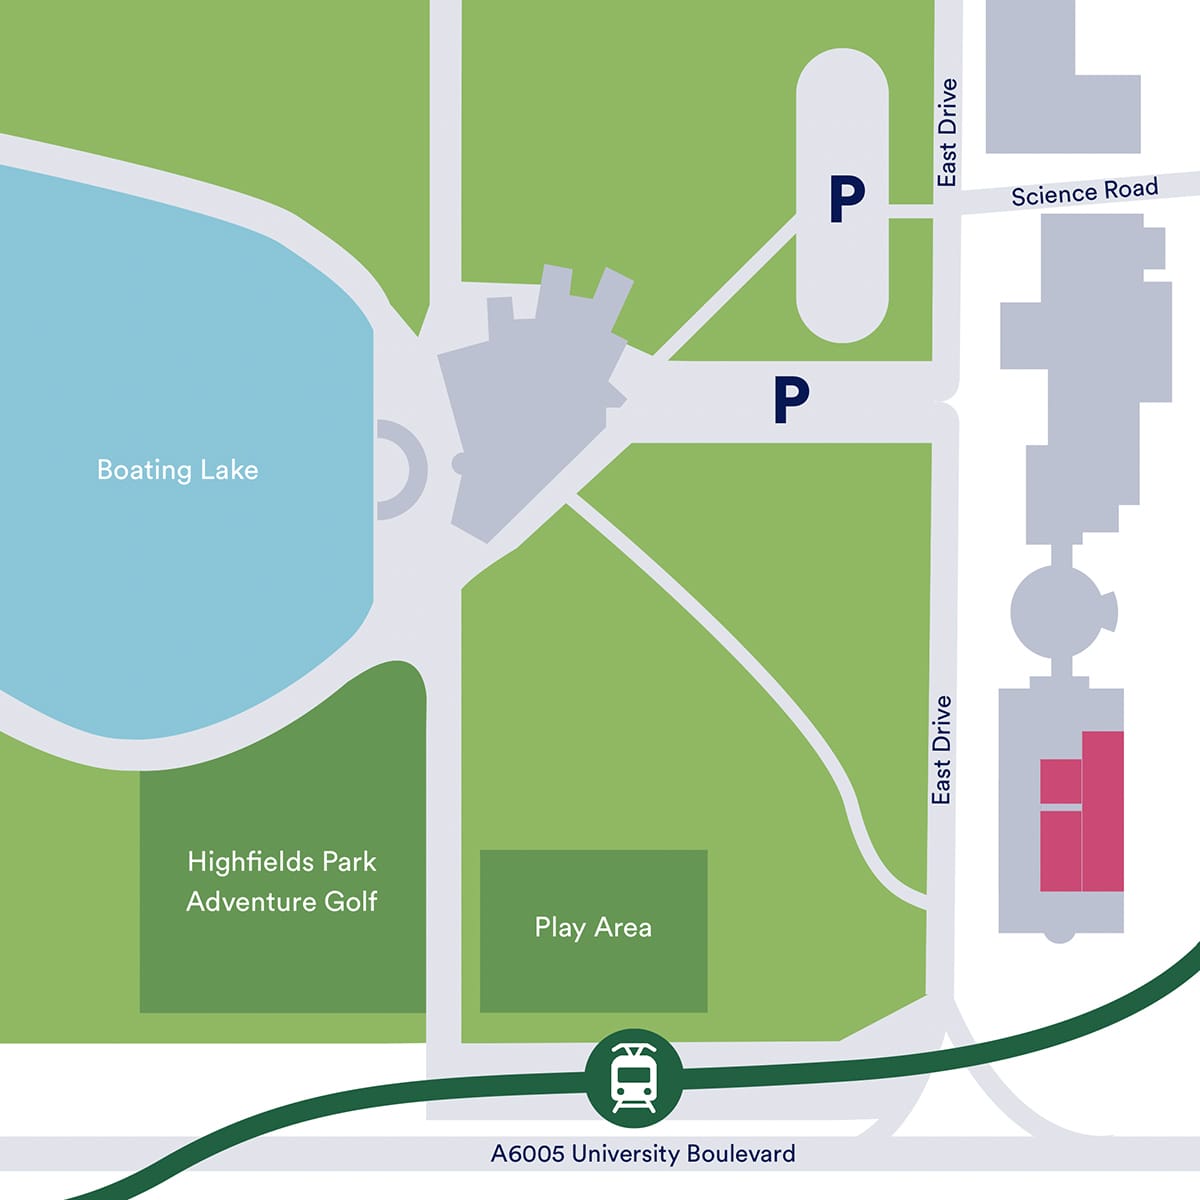 A map showing where the Djanogly Gallery is located in relation to Lakeside Arts' buildings and the surrounding parkland.